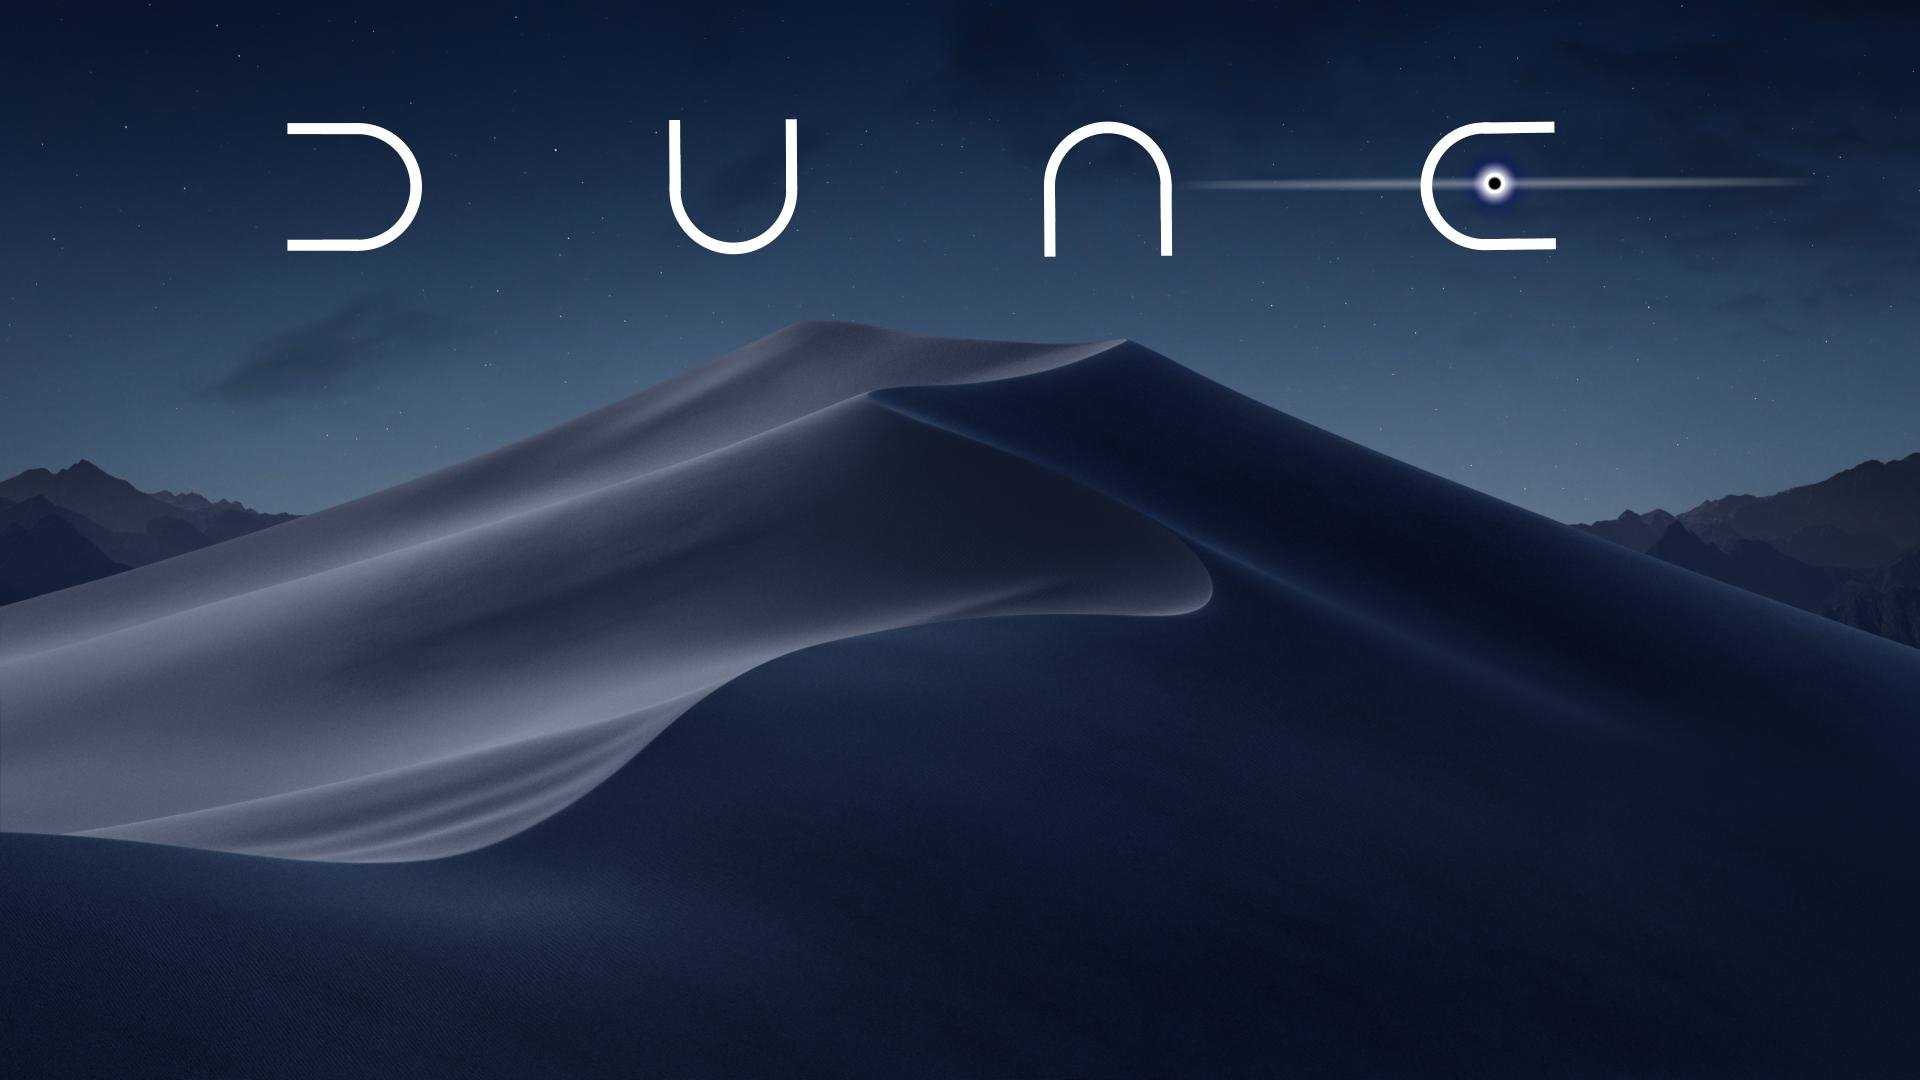 Dune Hd 2021 Movie Poster Wallpapers